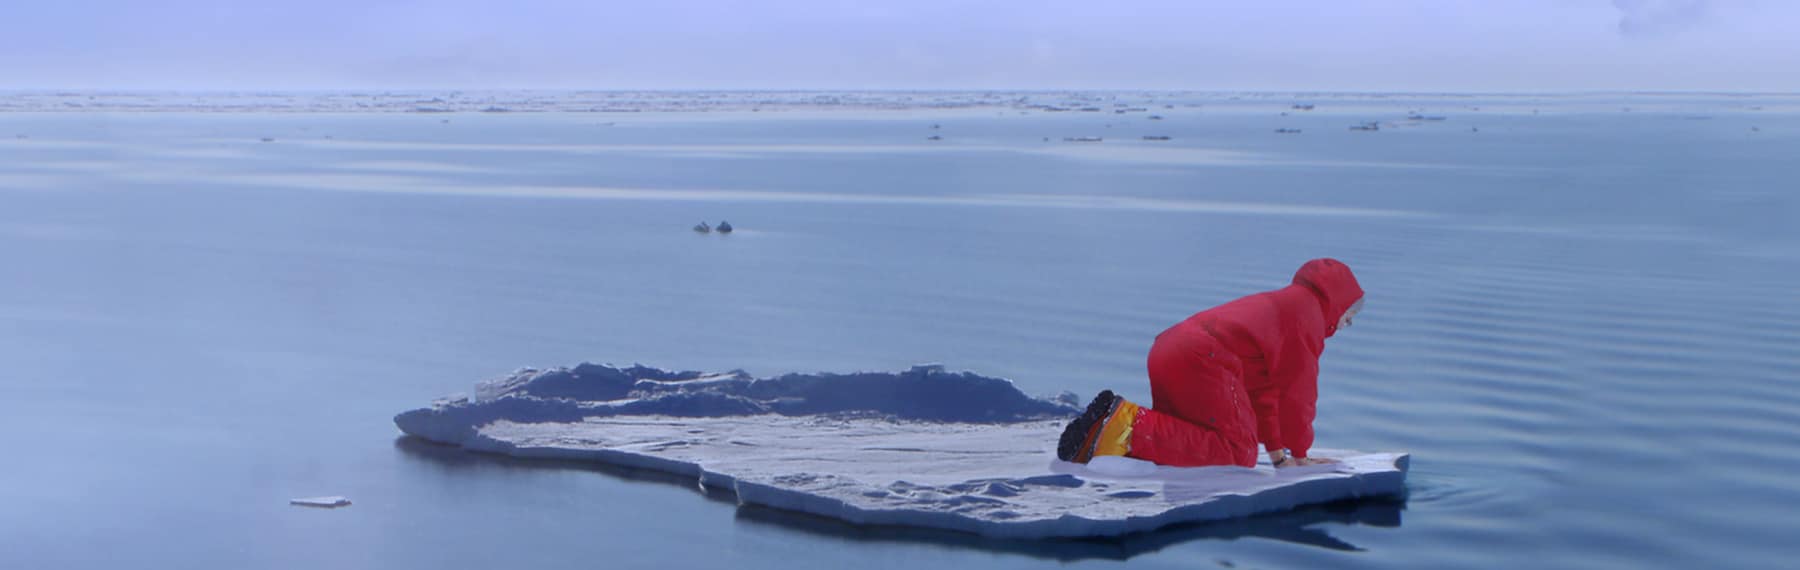 Impacts of climate change - Discovering Antarctica